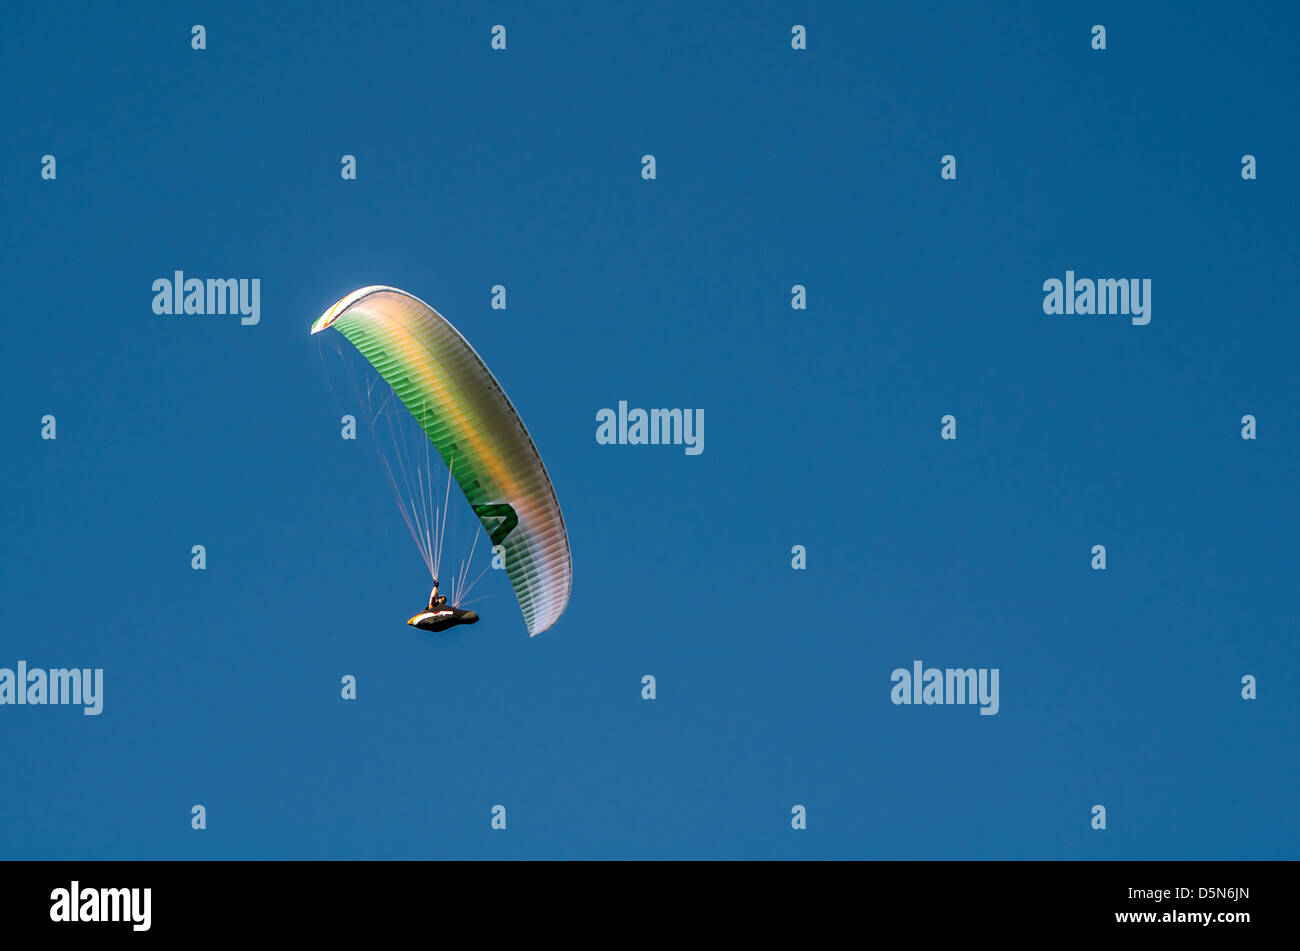 Hang gliding enthusiasts take the the skies creating a graceful spectacle at Stanwell Tops, Australia. Stock Photo